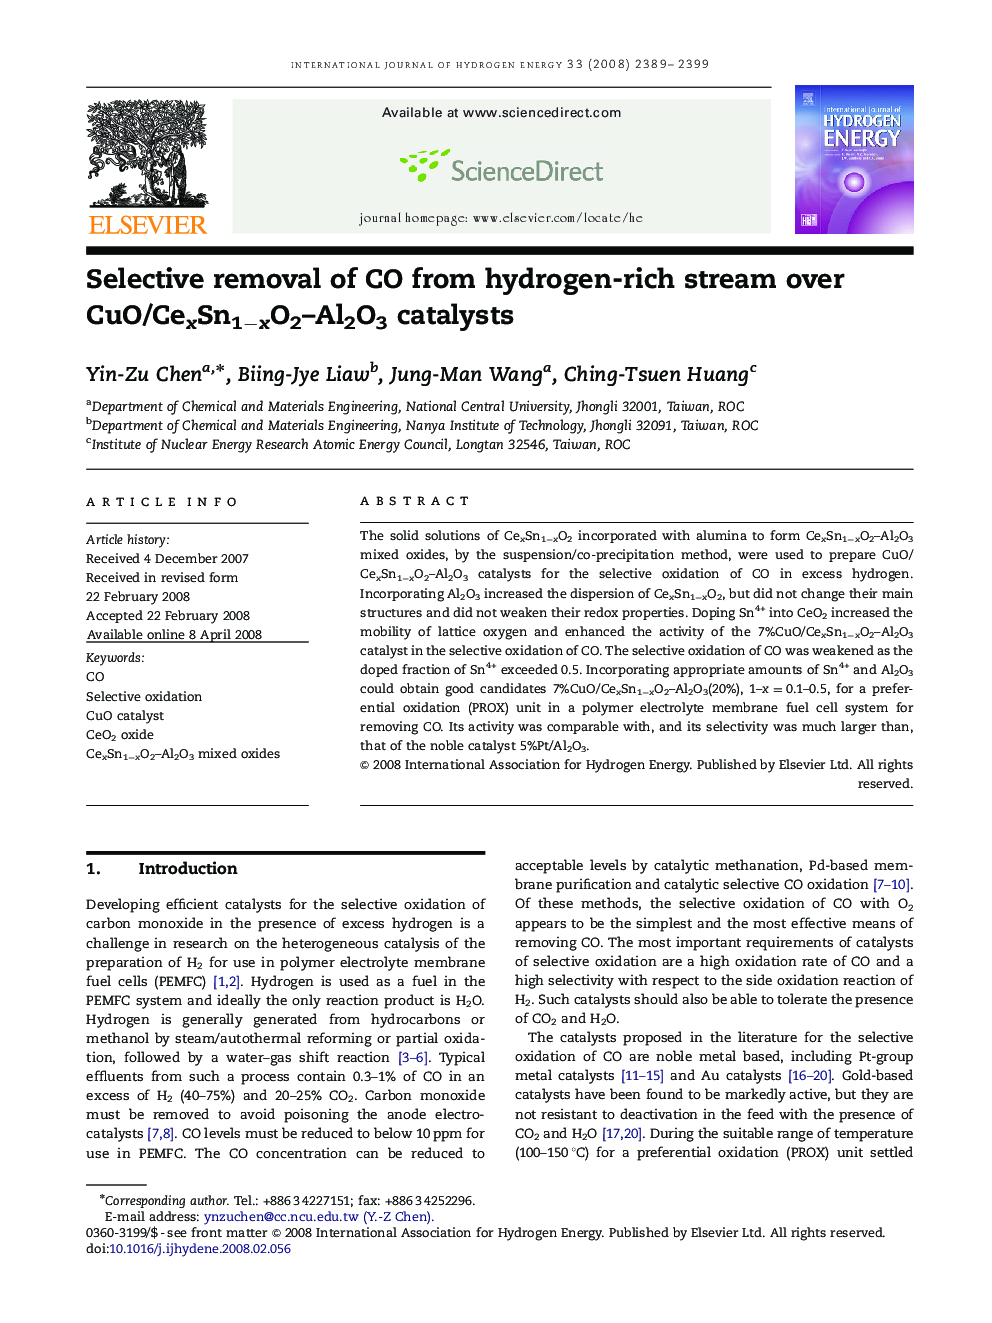 Selective removal of CO from hydrogen-rich stream over CuO/CexSn1−xO2–Al2O3 catalysts